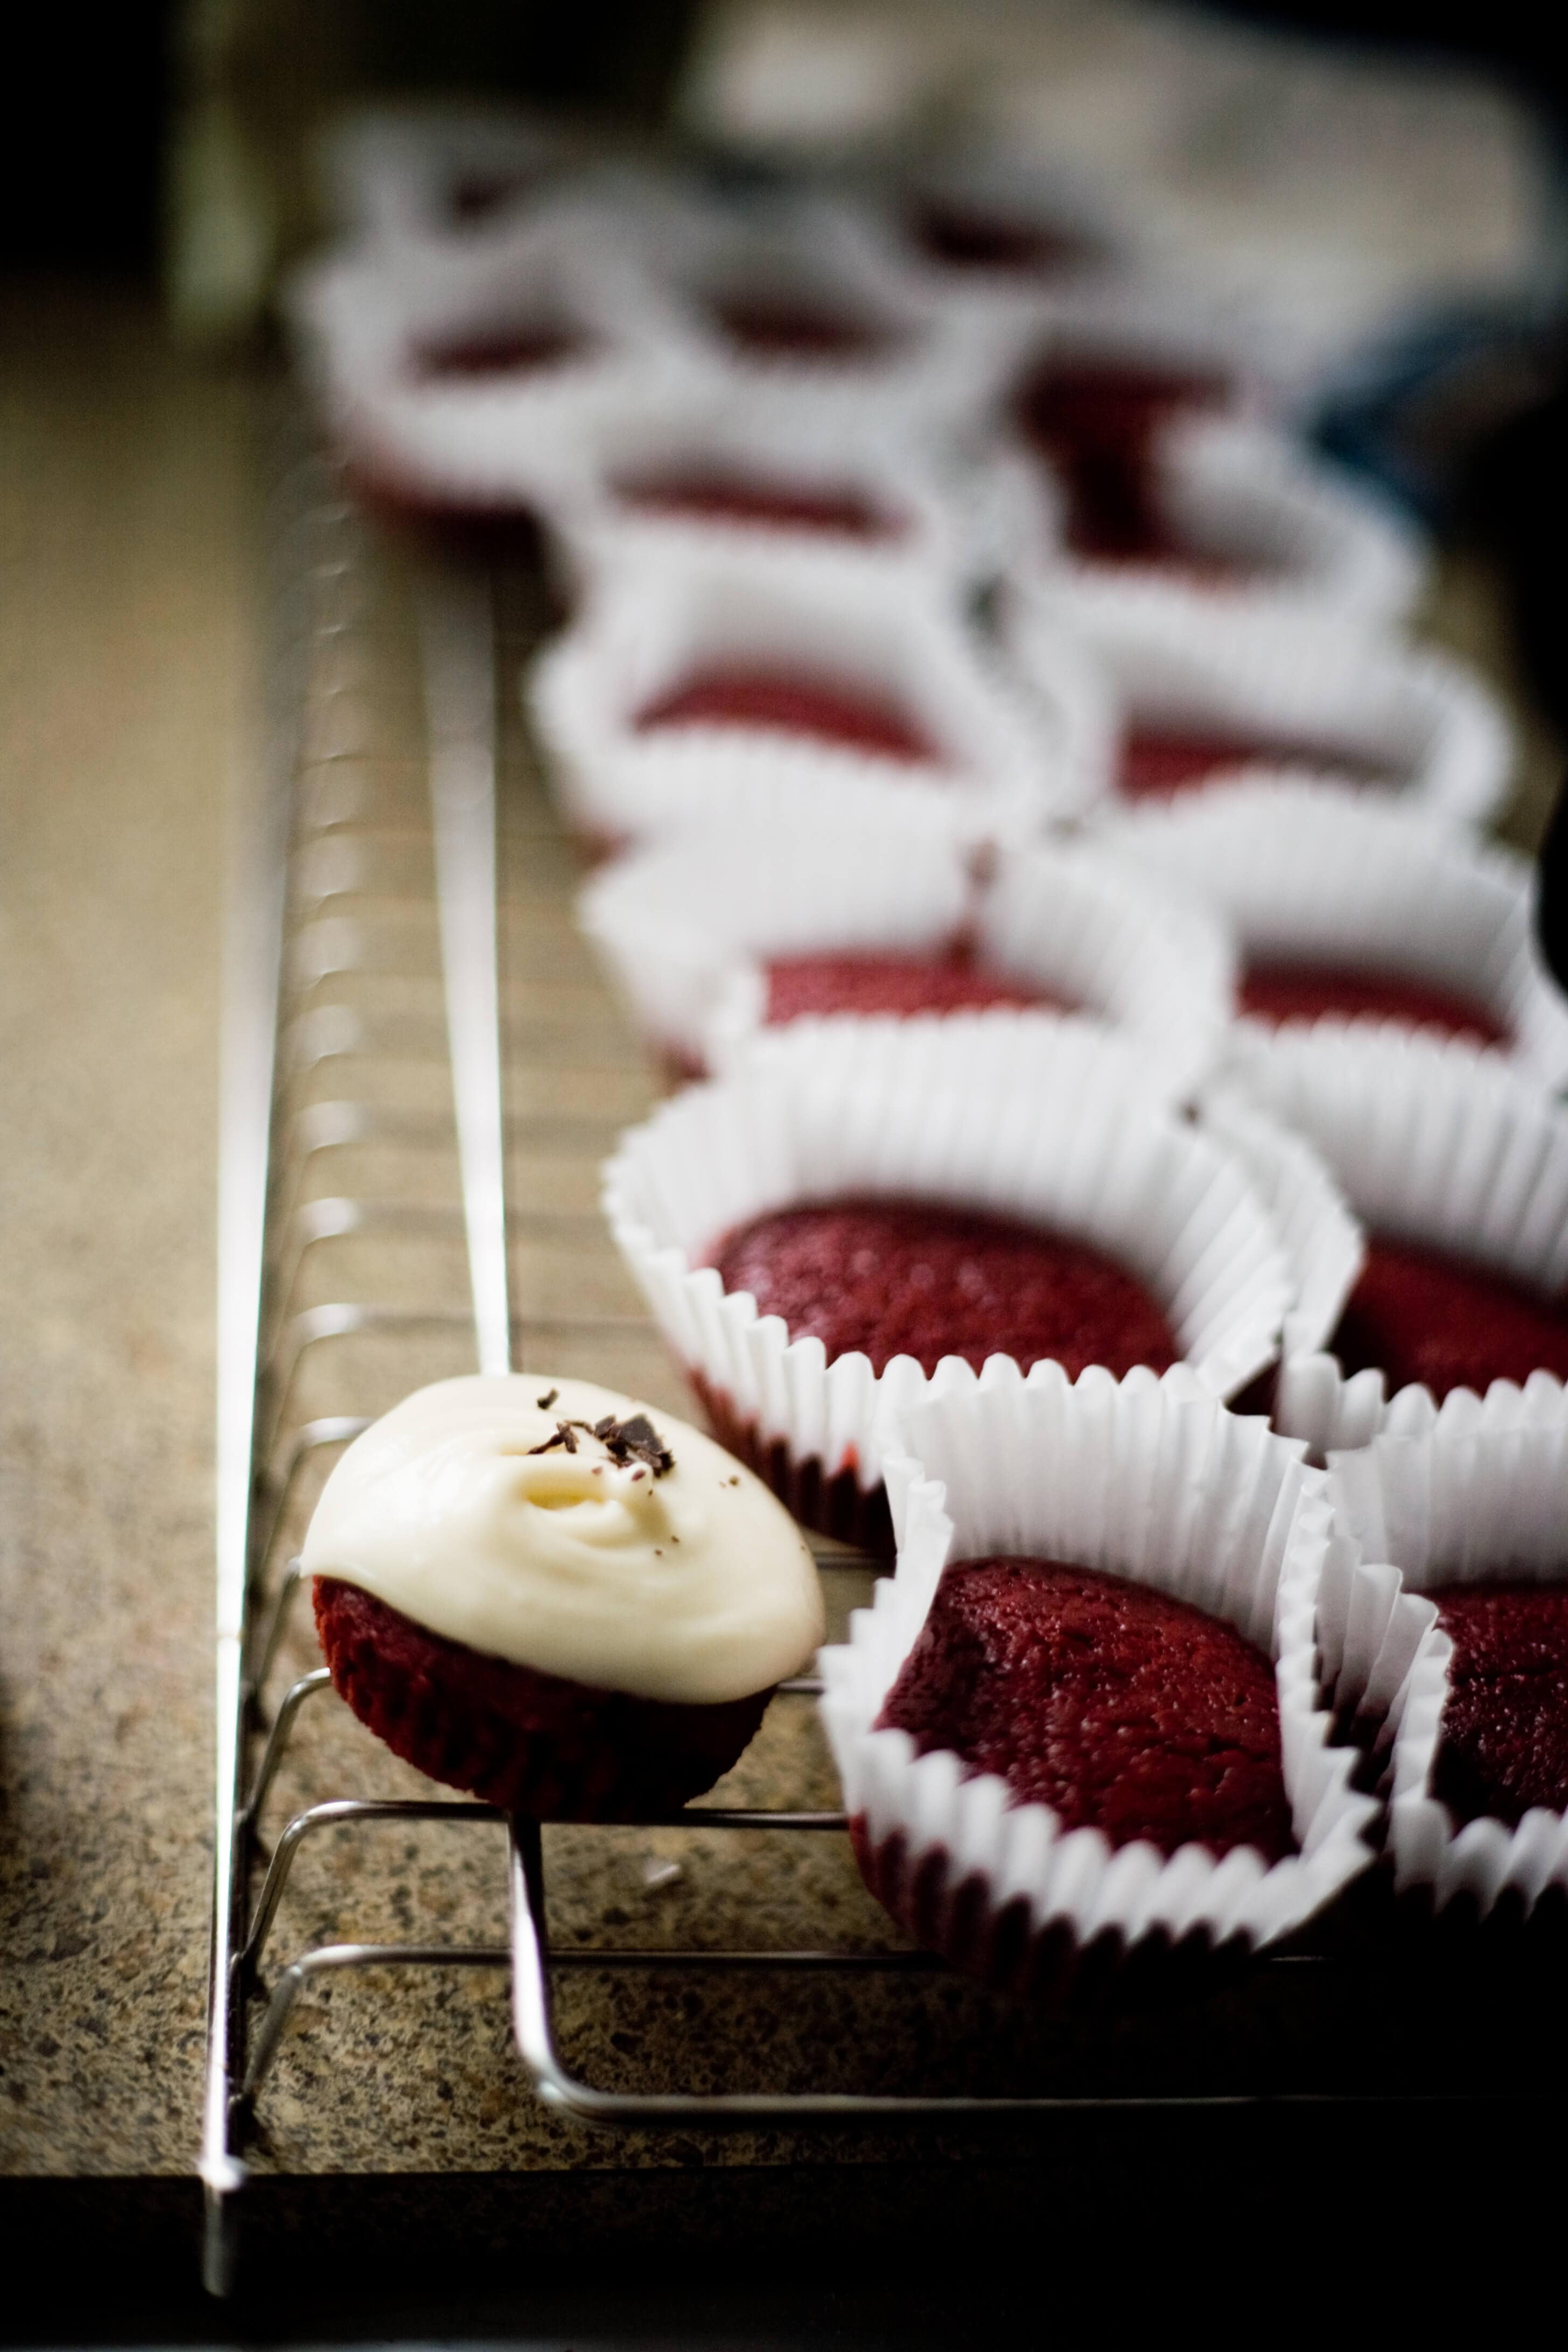 Naturally Colored Red Velvet Cupcakes Recipe1